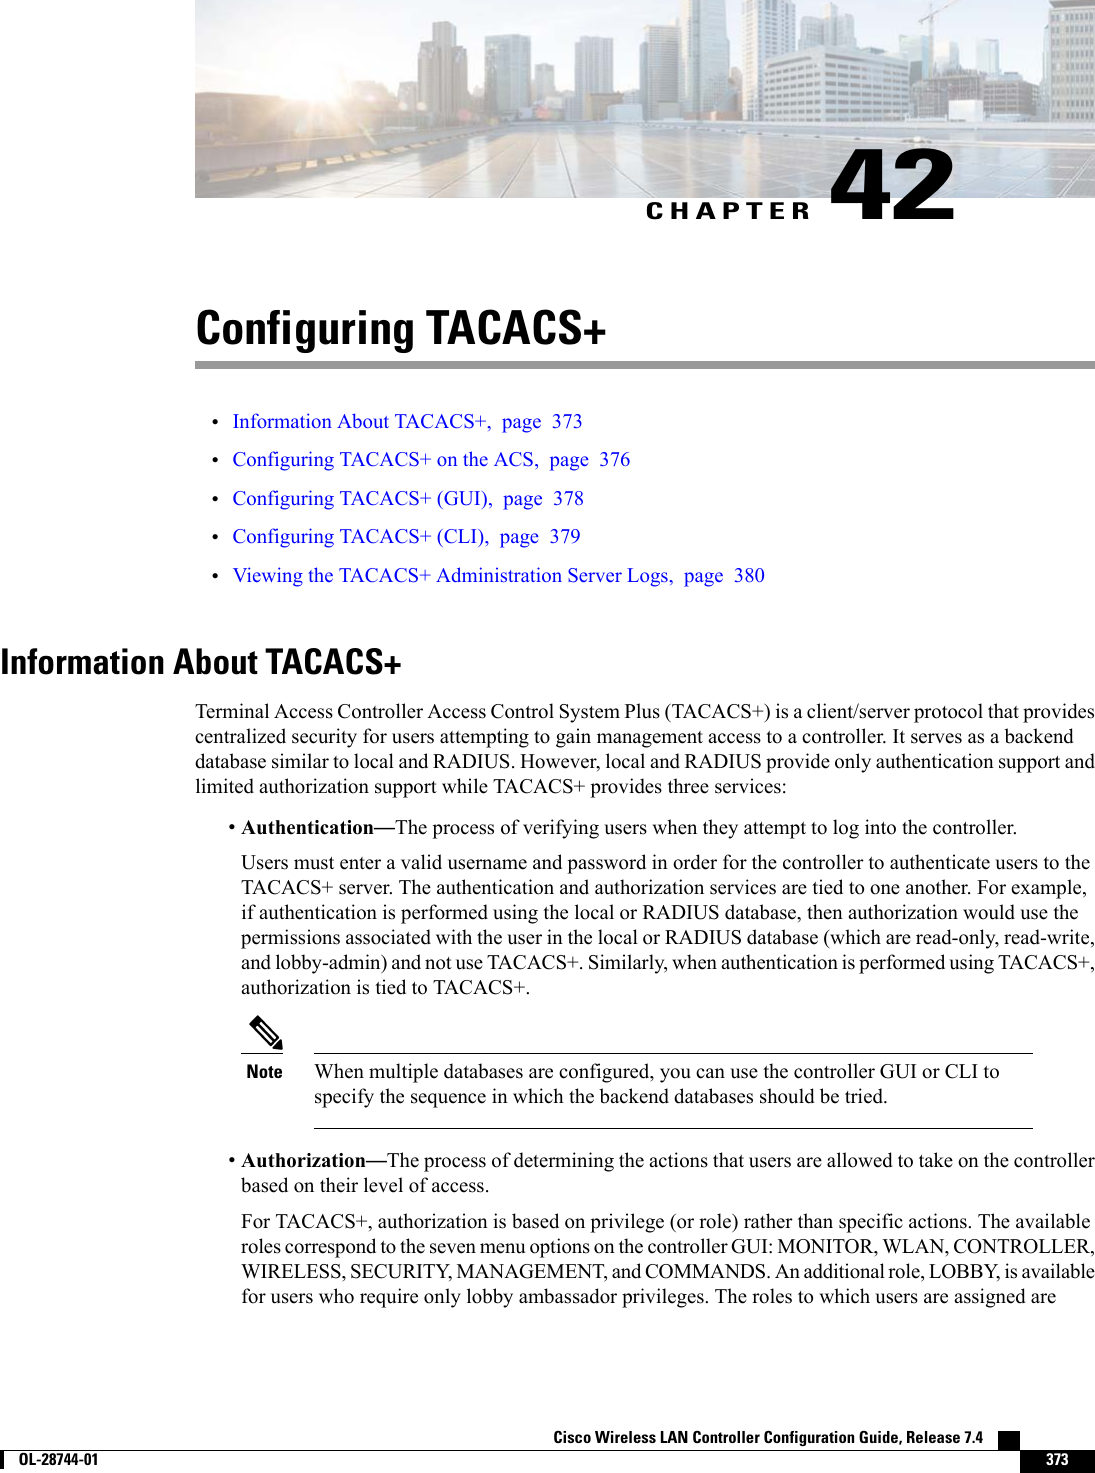 CHAPTER 42Configuring TACACS+•Information About TACACS+, page 373•Configuring TACACS+ on the ACS, page 376•Configuring TACACS+ (GUI), page 378•Configuring TACACS+ (CLI), page 379•Viewing the TACACS+ Administration Server Logs, page 380Information About TACACS+Terminal Access Controller Access Control System Plus (TACACS+) is a client/server protocol that providescentralized security for users attempting to gain management access to a controller. It serves as a backenddatabase similar to local and RADIUS. However, local and RADIUS provide only authentication support andlimited authorization support while TACACS+ provides three services:•Authentication—The process of verifying users when they attempt to log into the controller.Users must enter a valid username and password in order for the controller to authenticate users to theTACACS+ server. The authentication and authorization services are tied to one another. For example,if authentication is performed using the local or RADIUS database, then authorization would use thepermissions associated with the user in the local or RADIUS database (which are read-only, read-write,and lobby-admin) and not use TACACS+. Similarly, when authentication is performed using TACACS+,authorization is tied to TACACS+.When multiple databases are configured, you can use the controller GUI or CLI tospecify the sequence in which the backend databases should be tried.Note•Authorization—The process of determining the actions that users are allowed to take on the controllerbased on their level of access.For TACACS+, authorization is based on privilege (or role) rather than specific actions. The availableroles correspond to the seven menu options on the controller GUI: MONITOR, WLAN, CONTROLLER,WIRELESS, SECURITY, MANAGEMENT, and COMMANDS. An additional role, LOBBY, is availablefor users who require only lobby ambassador privileges. The roles to which users are assigned areCisco Wireless LAN Controller Configuration Guide, Release 7.4        OL-28744-01 373